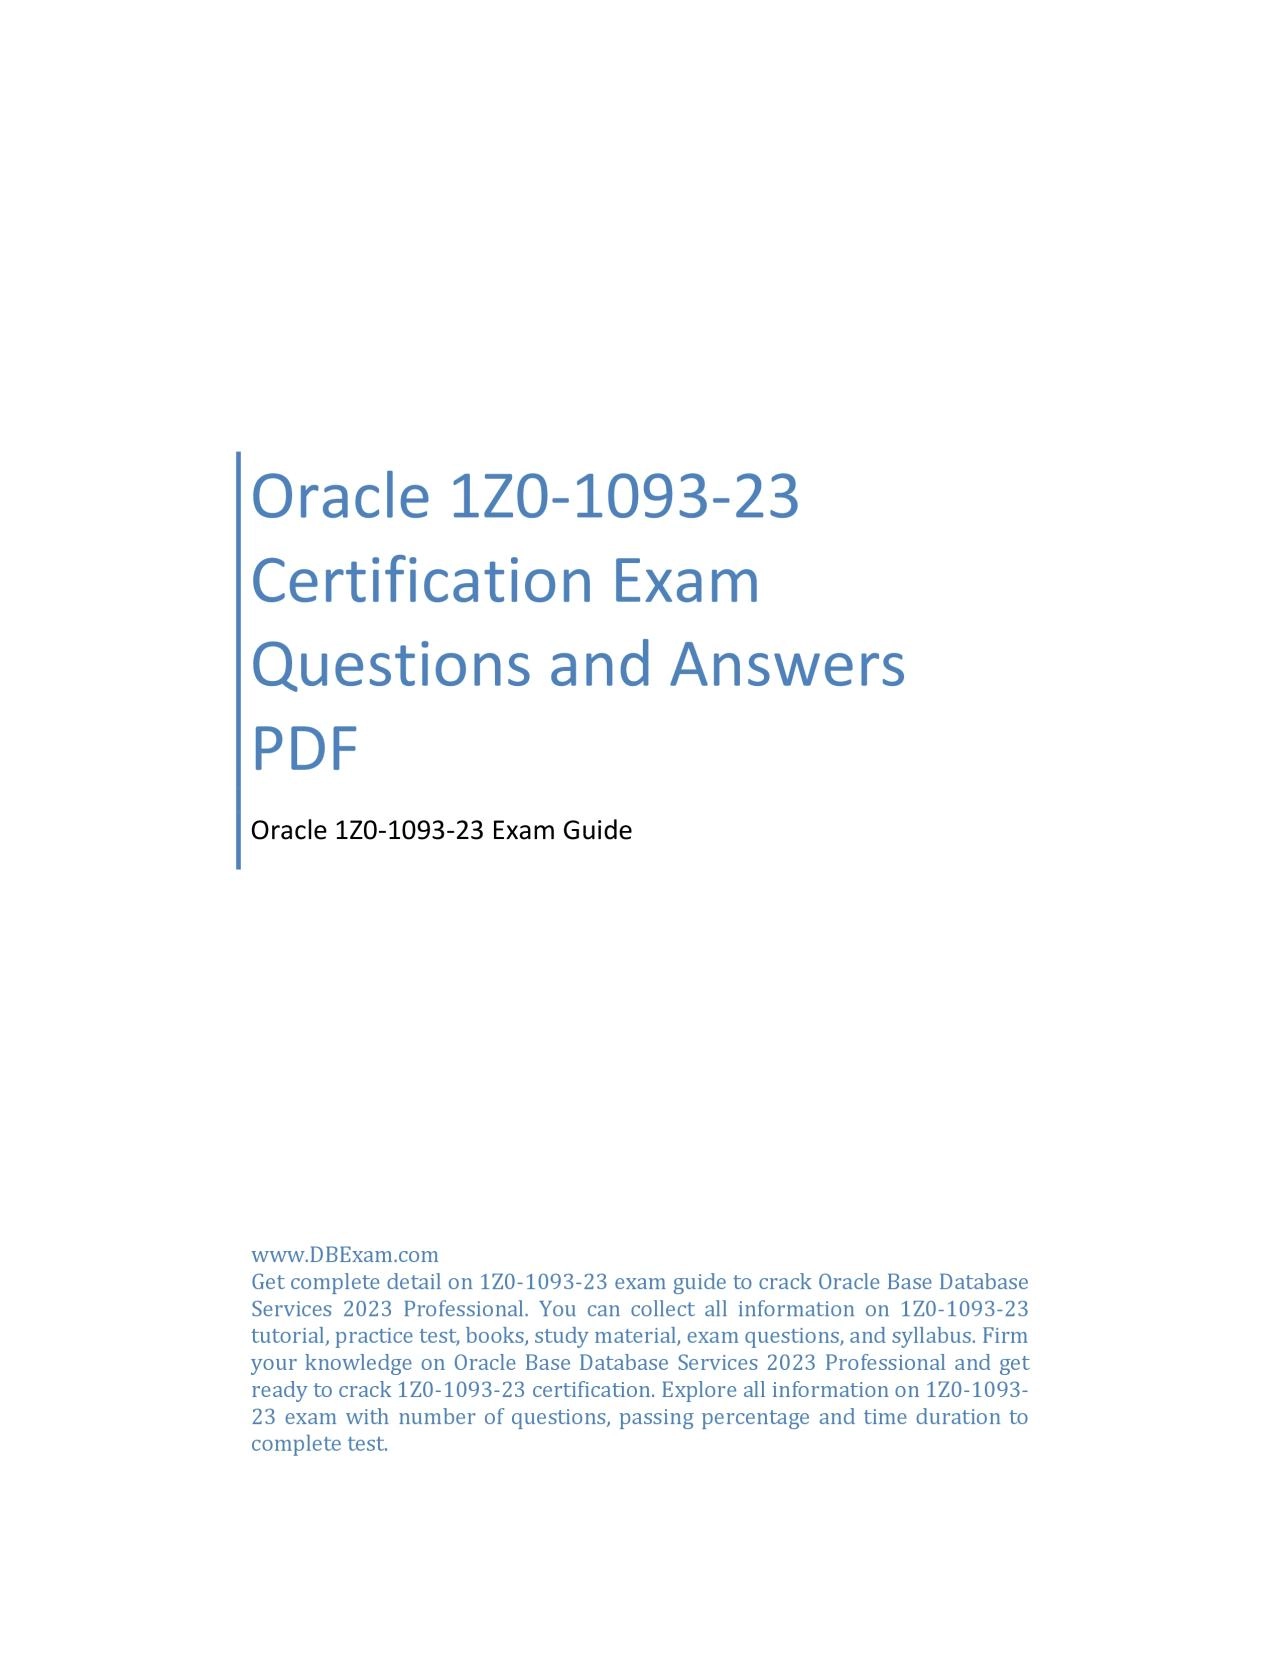 Oracle 1Z0-1093-23 Certification Exam Questions and Answers PDF